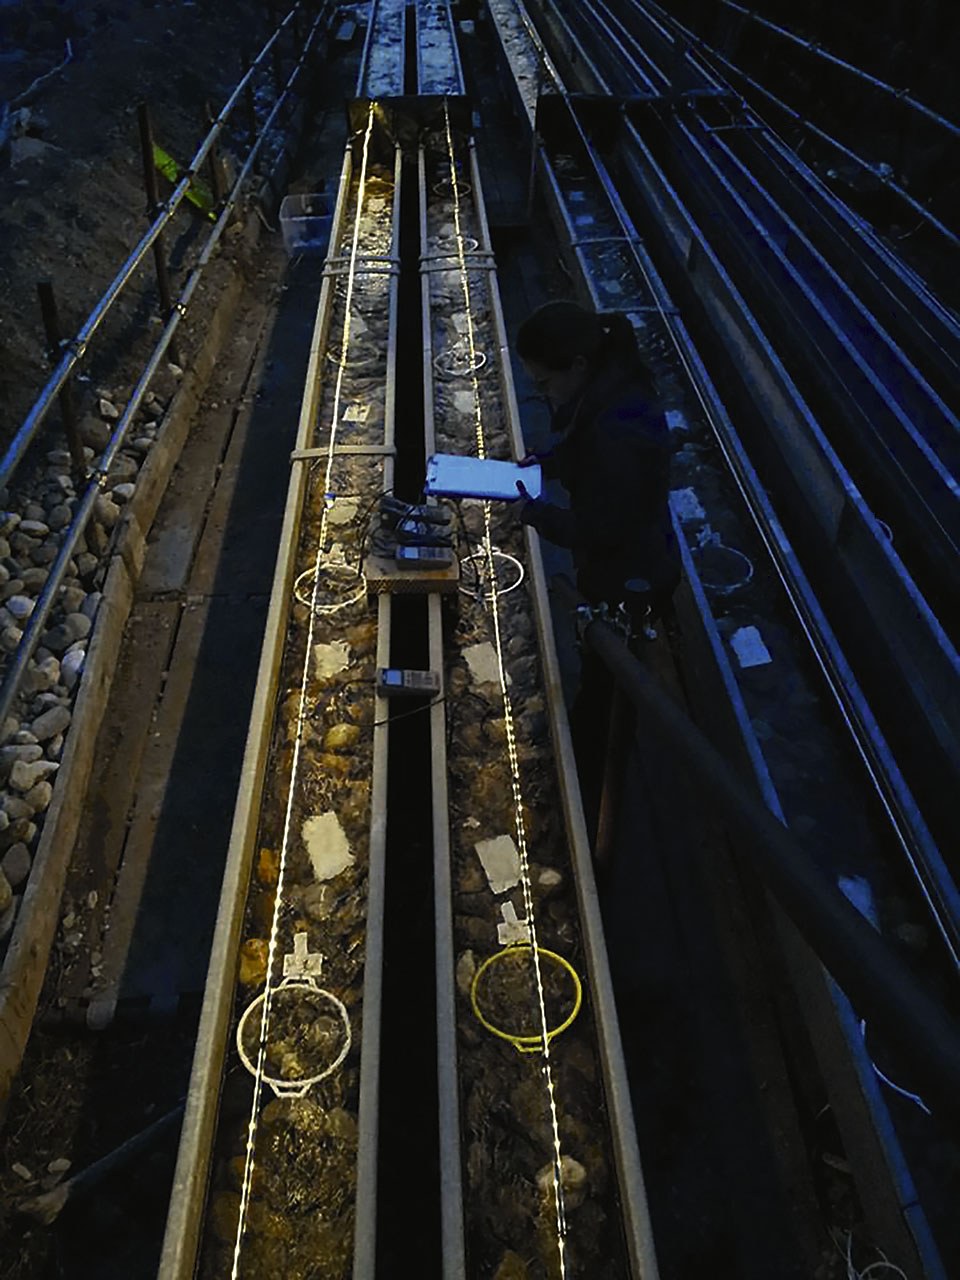 Night measurements during a light pollution experiment in an outdoor, stream-side experimental system